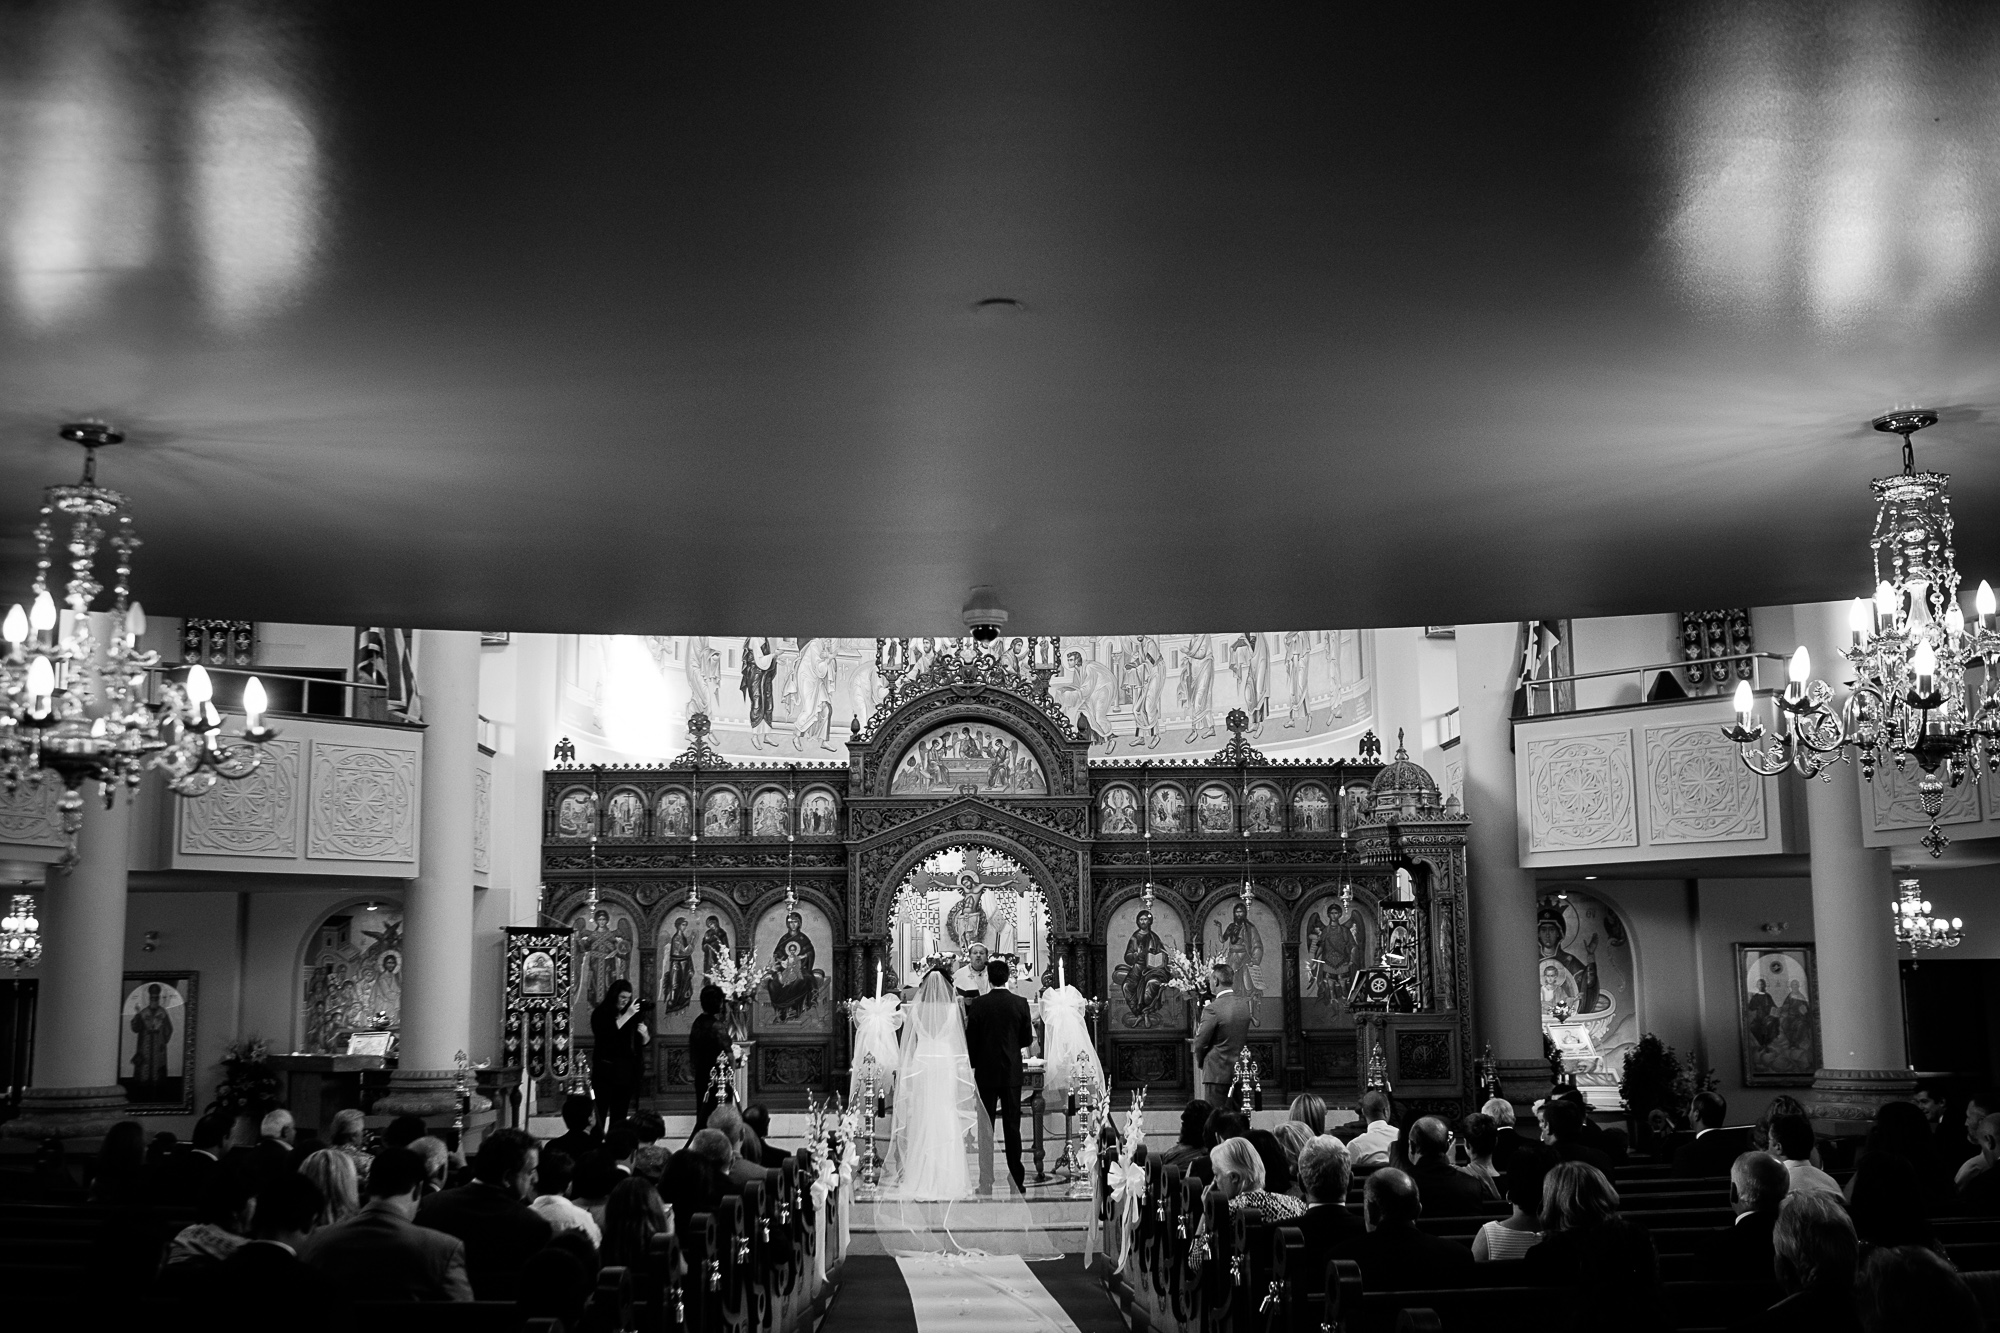  A photograph during their wedding ceremony at a Greek Orthodox Church. 